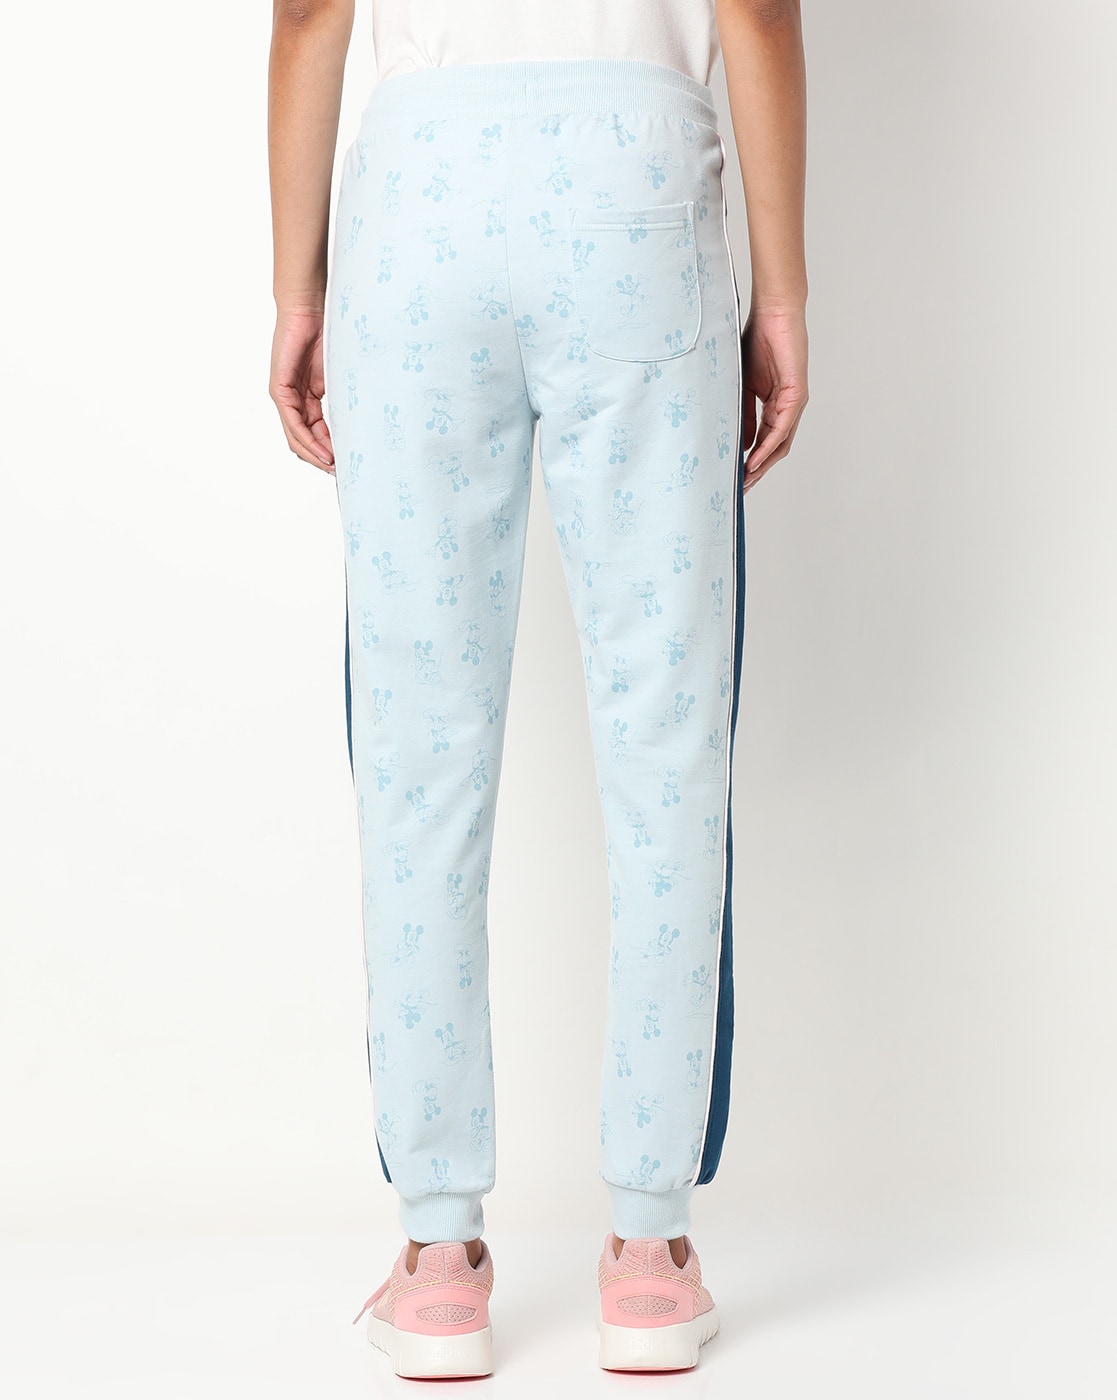 Buy Blue Track Pants for Women by Disney Online